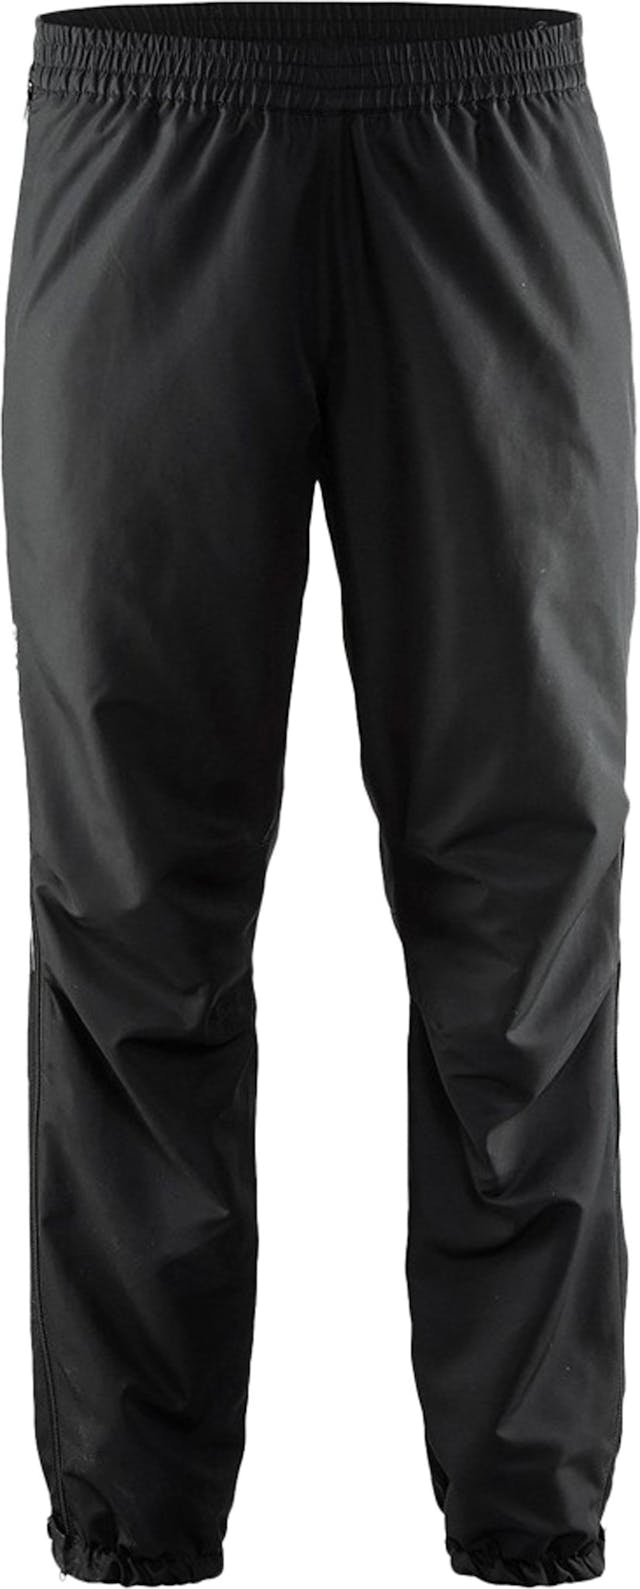 Product image for Cruise Pants - Women's